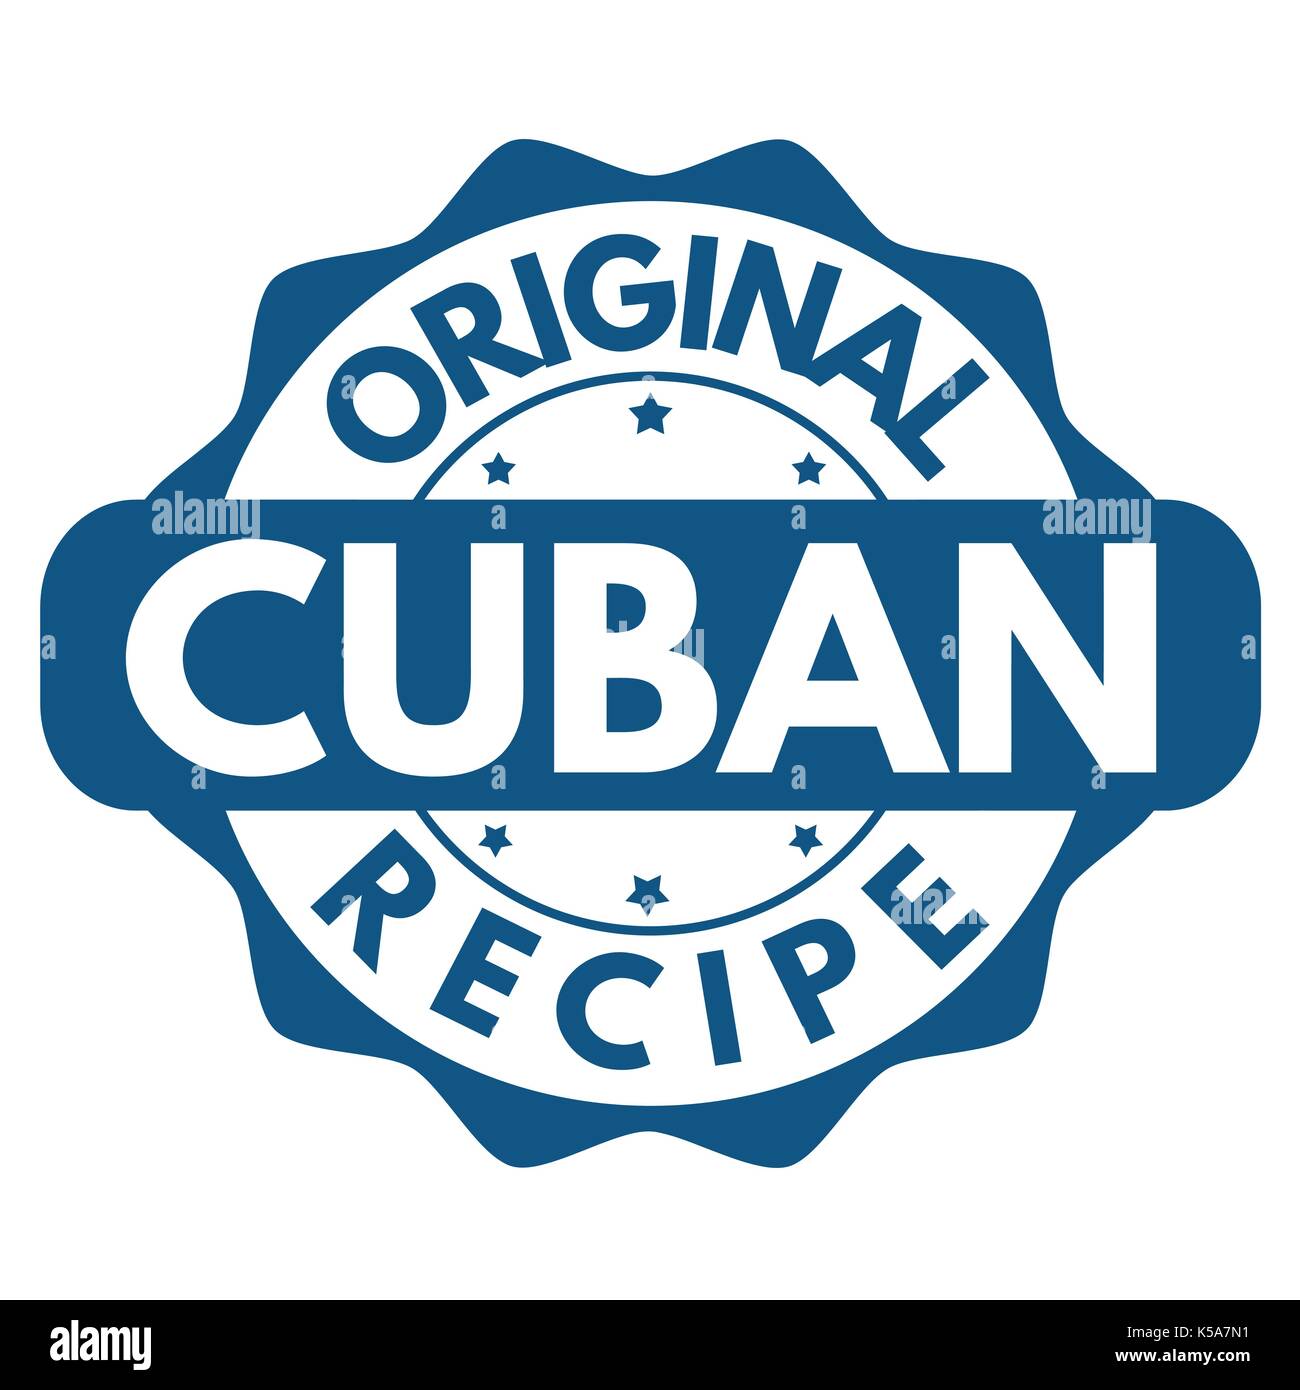 Original Cuban recipe sign or stamp on white background, vector illustration Stock Vector